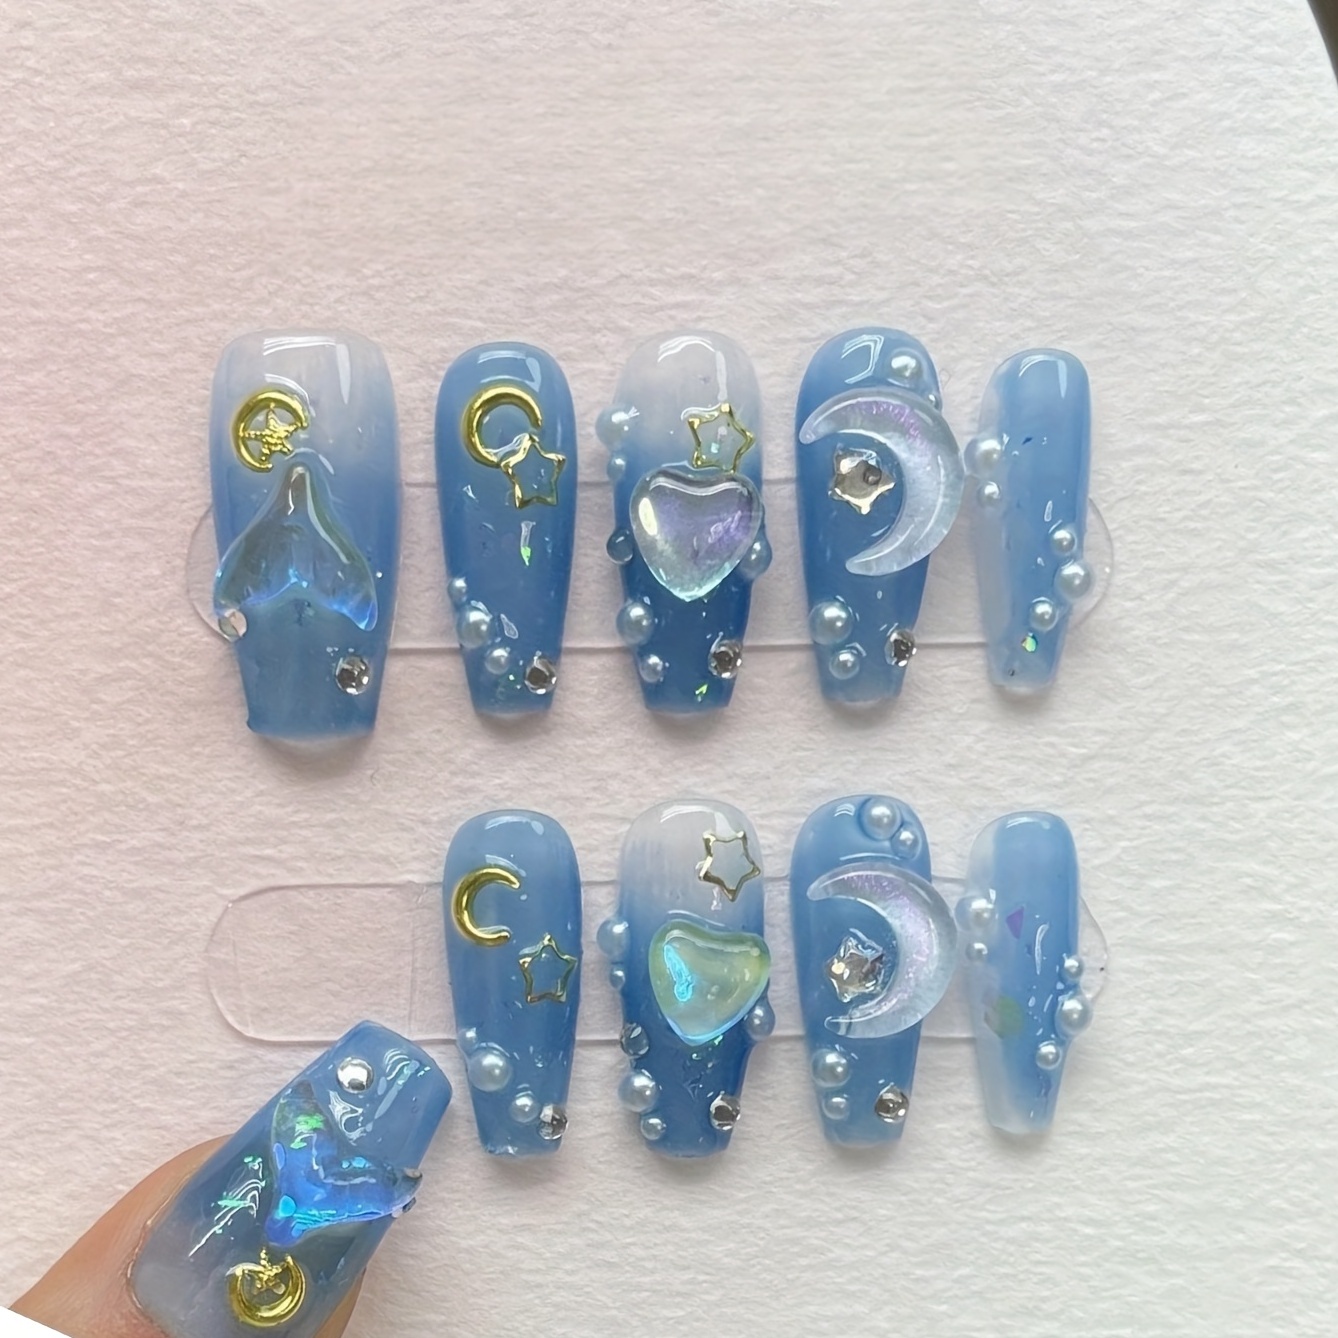 

10pcs Y2k Handmade Press On Nails - Ice Transparent Blue Gradient With 3d Moon, Heart, Crystal Gems - Glossy Long Coffin False Nails For Women And Girls